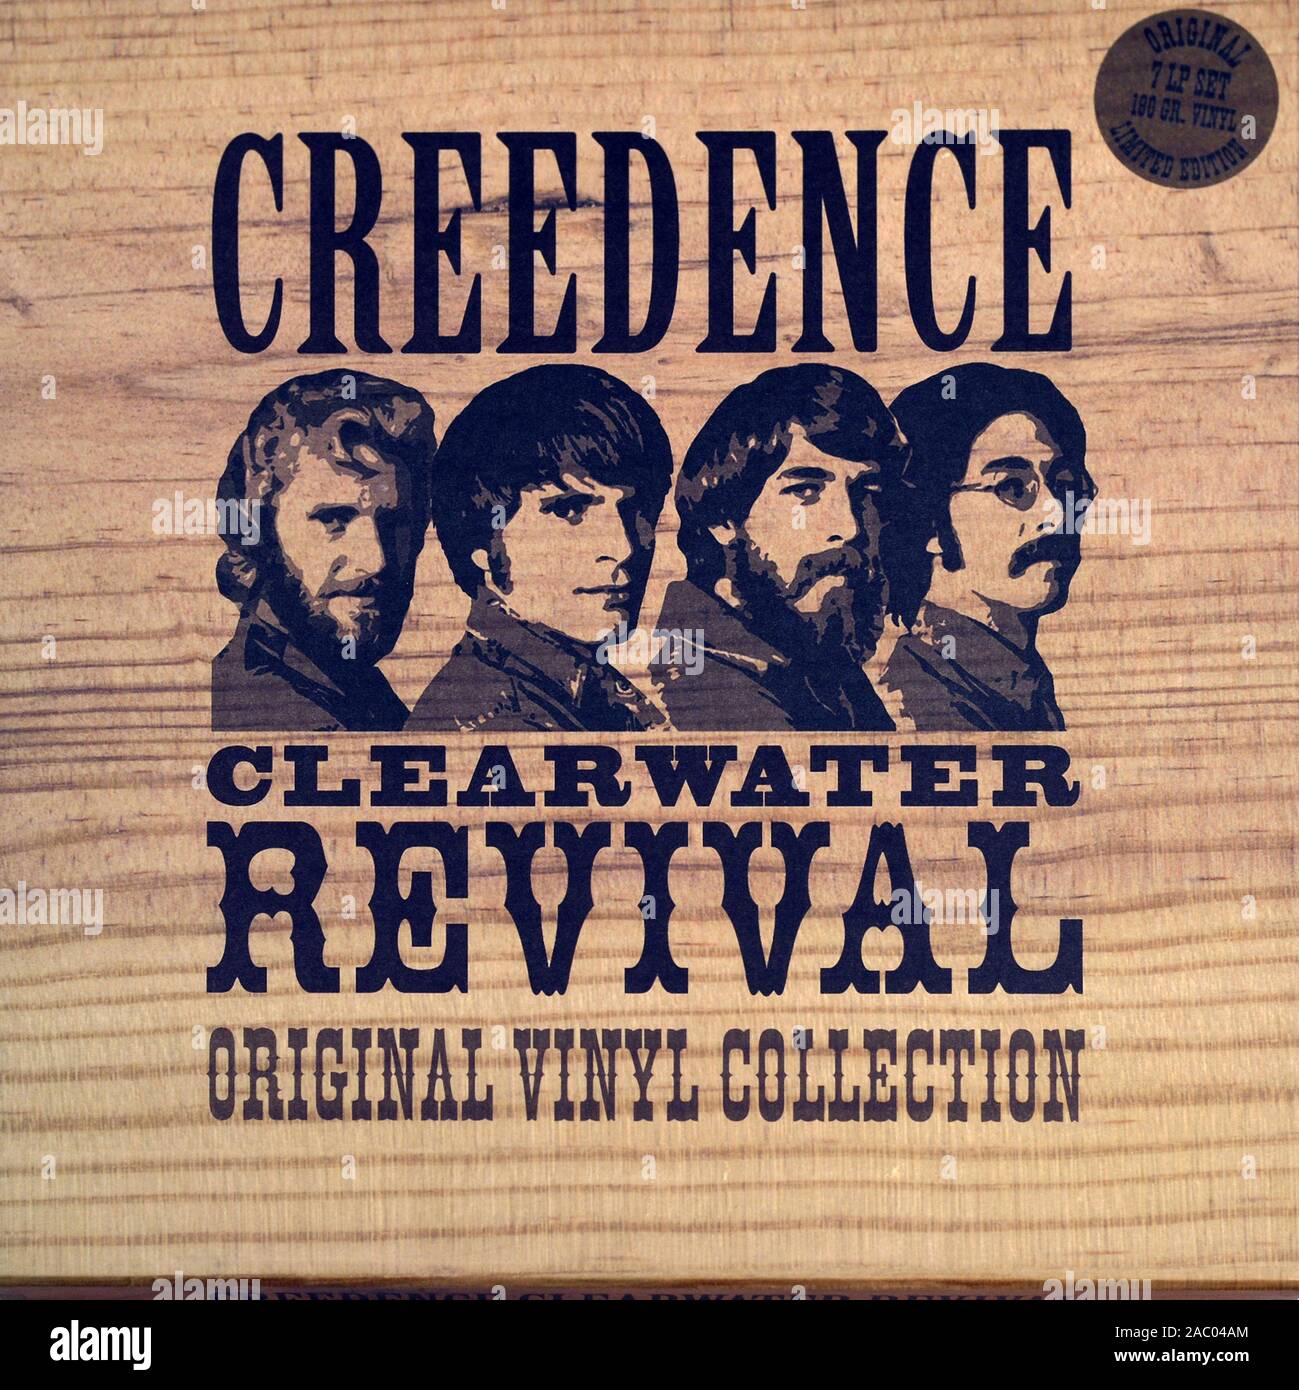 CCR Creedence Clearwater Revival  - Vintage vinyl album cover Stock Photo